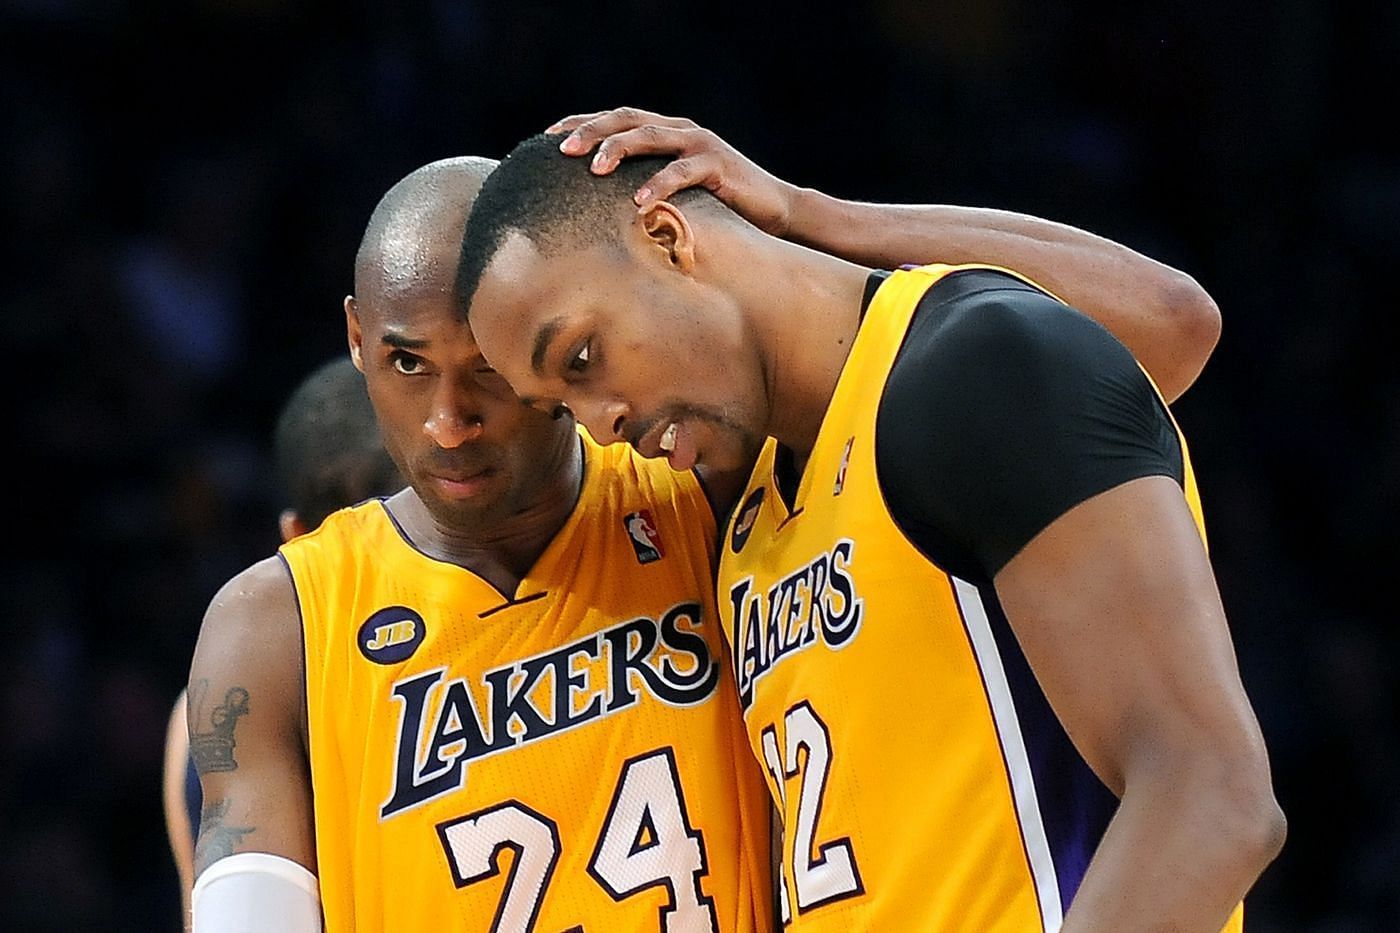 Lakers 2012-13 Team With Kobe, Dwight, Nash: Where Are They Now?